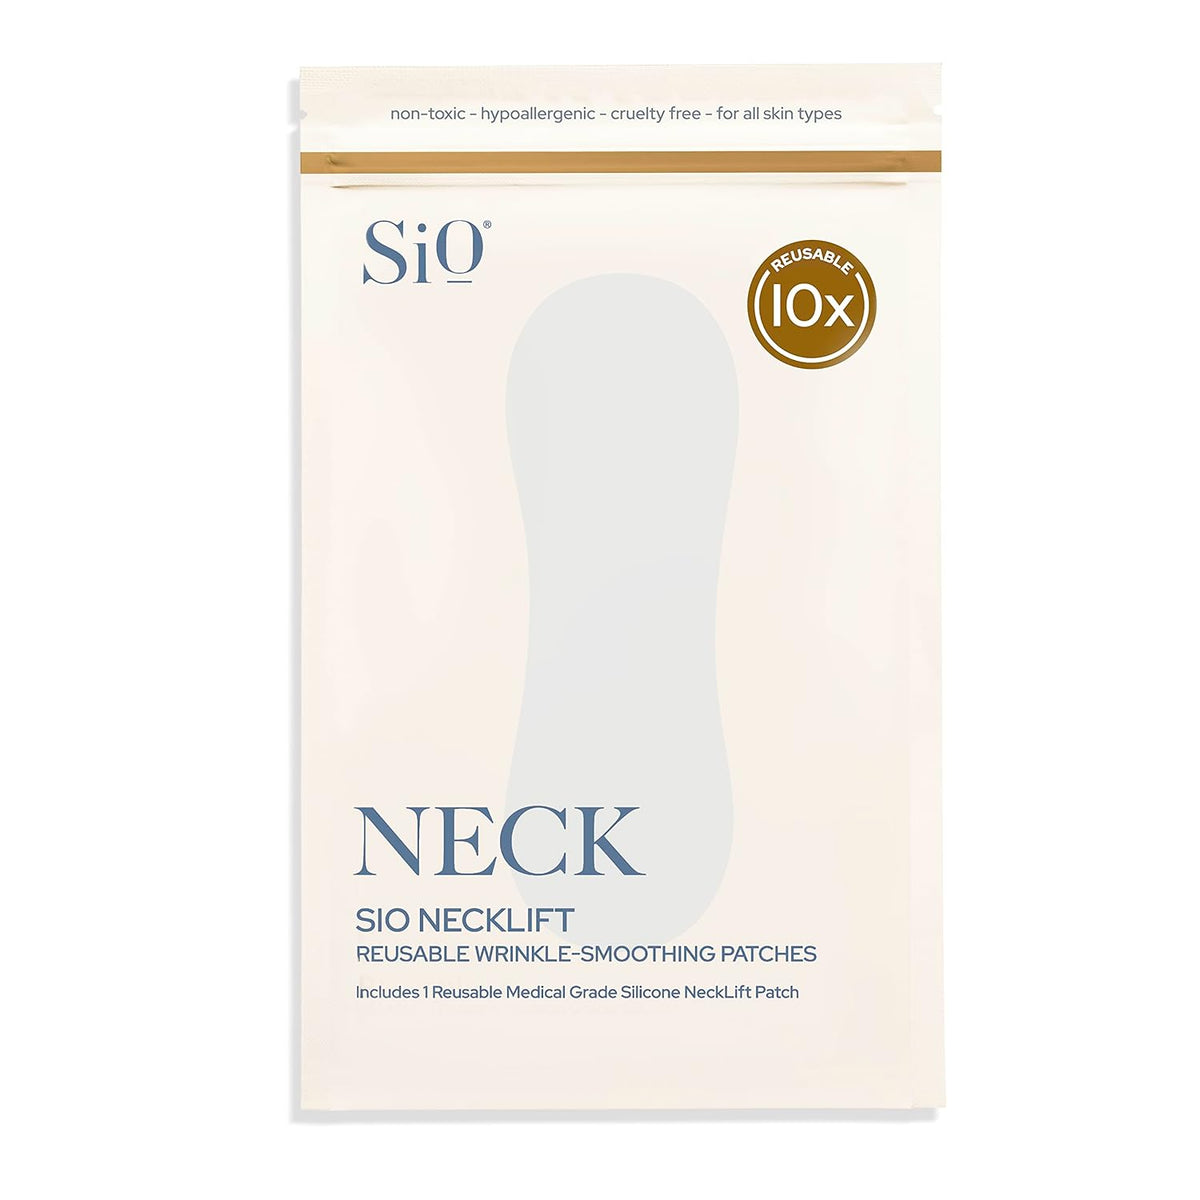 Neck Sio Necklift Reusable Wrinkle Smoothing Patches